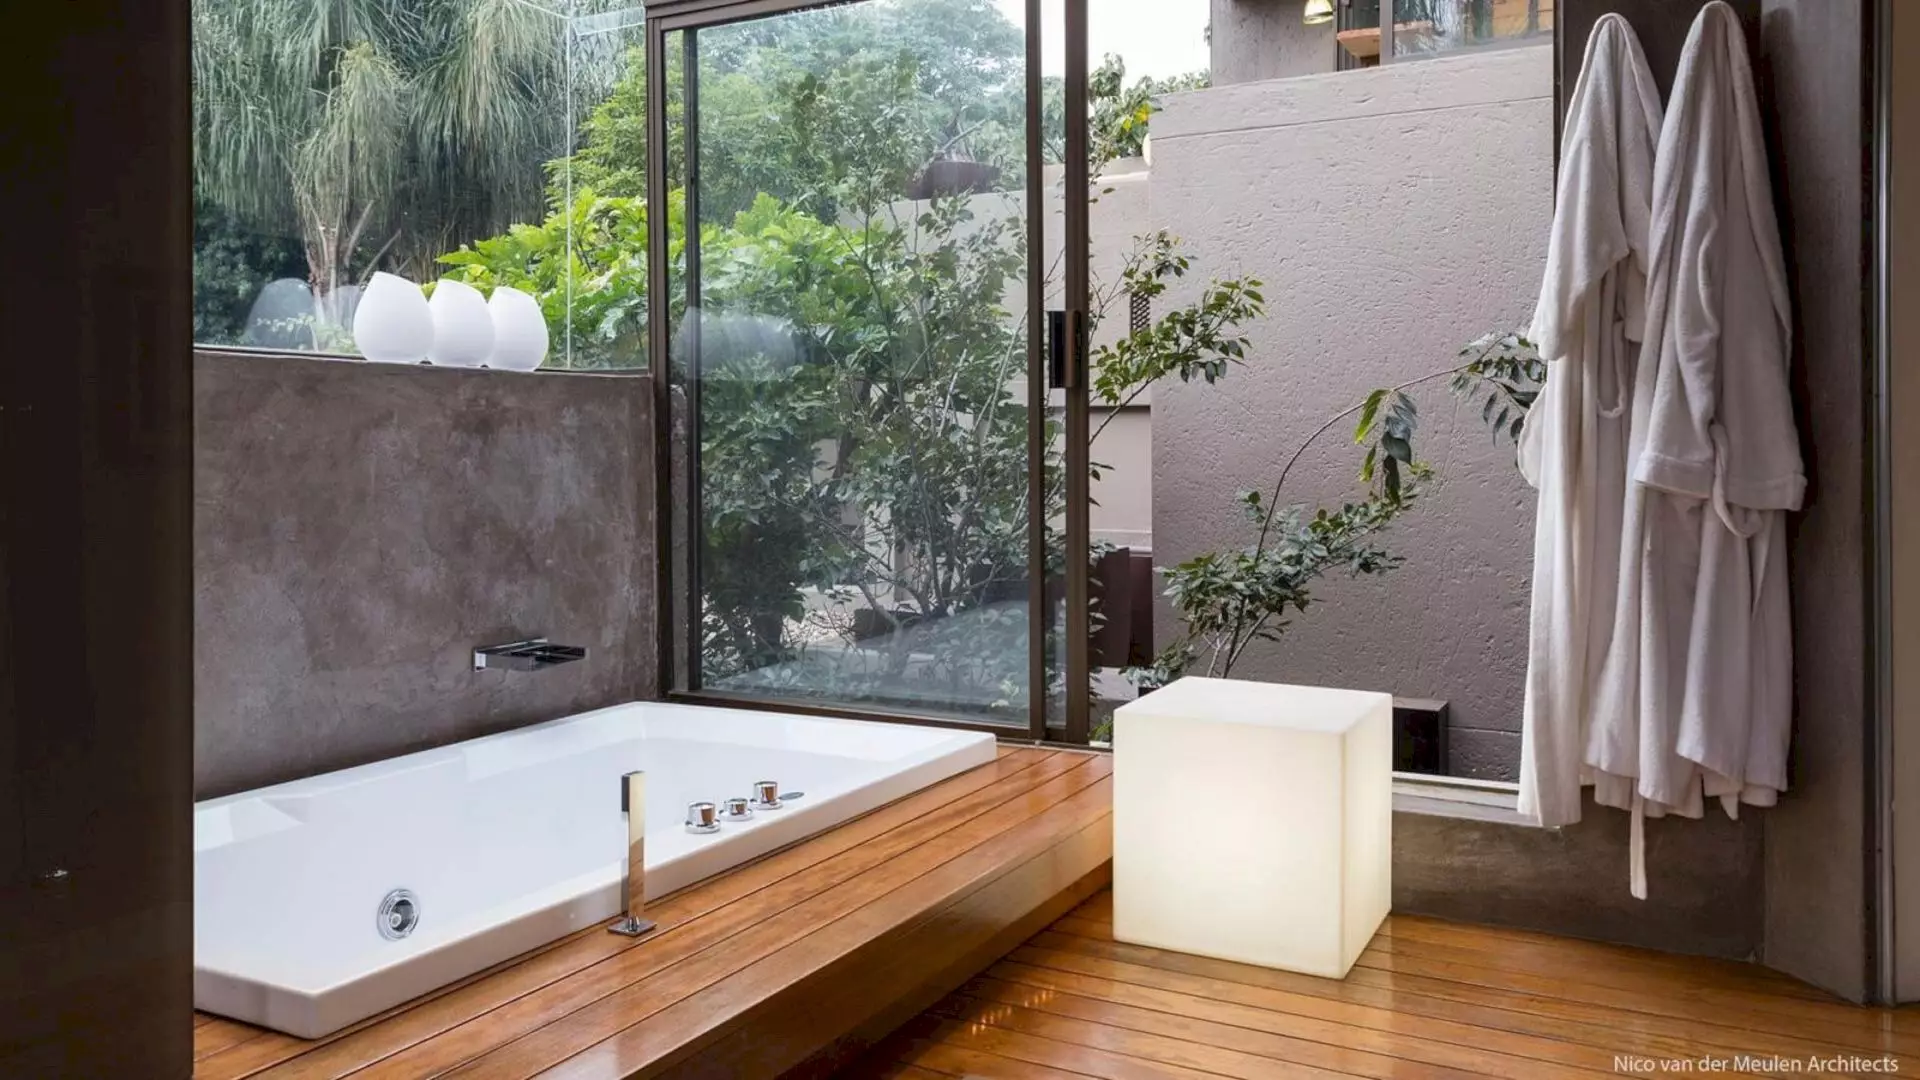 8 Spa-Like Bathrooms Designed to Instantly Soothe - Dwell